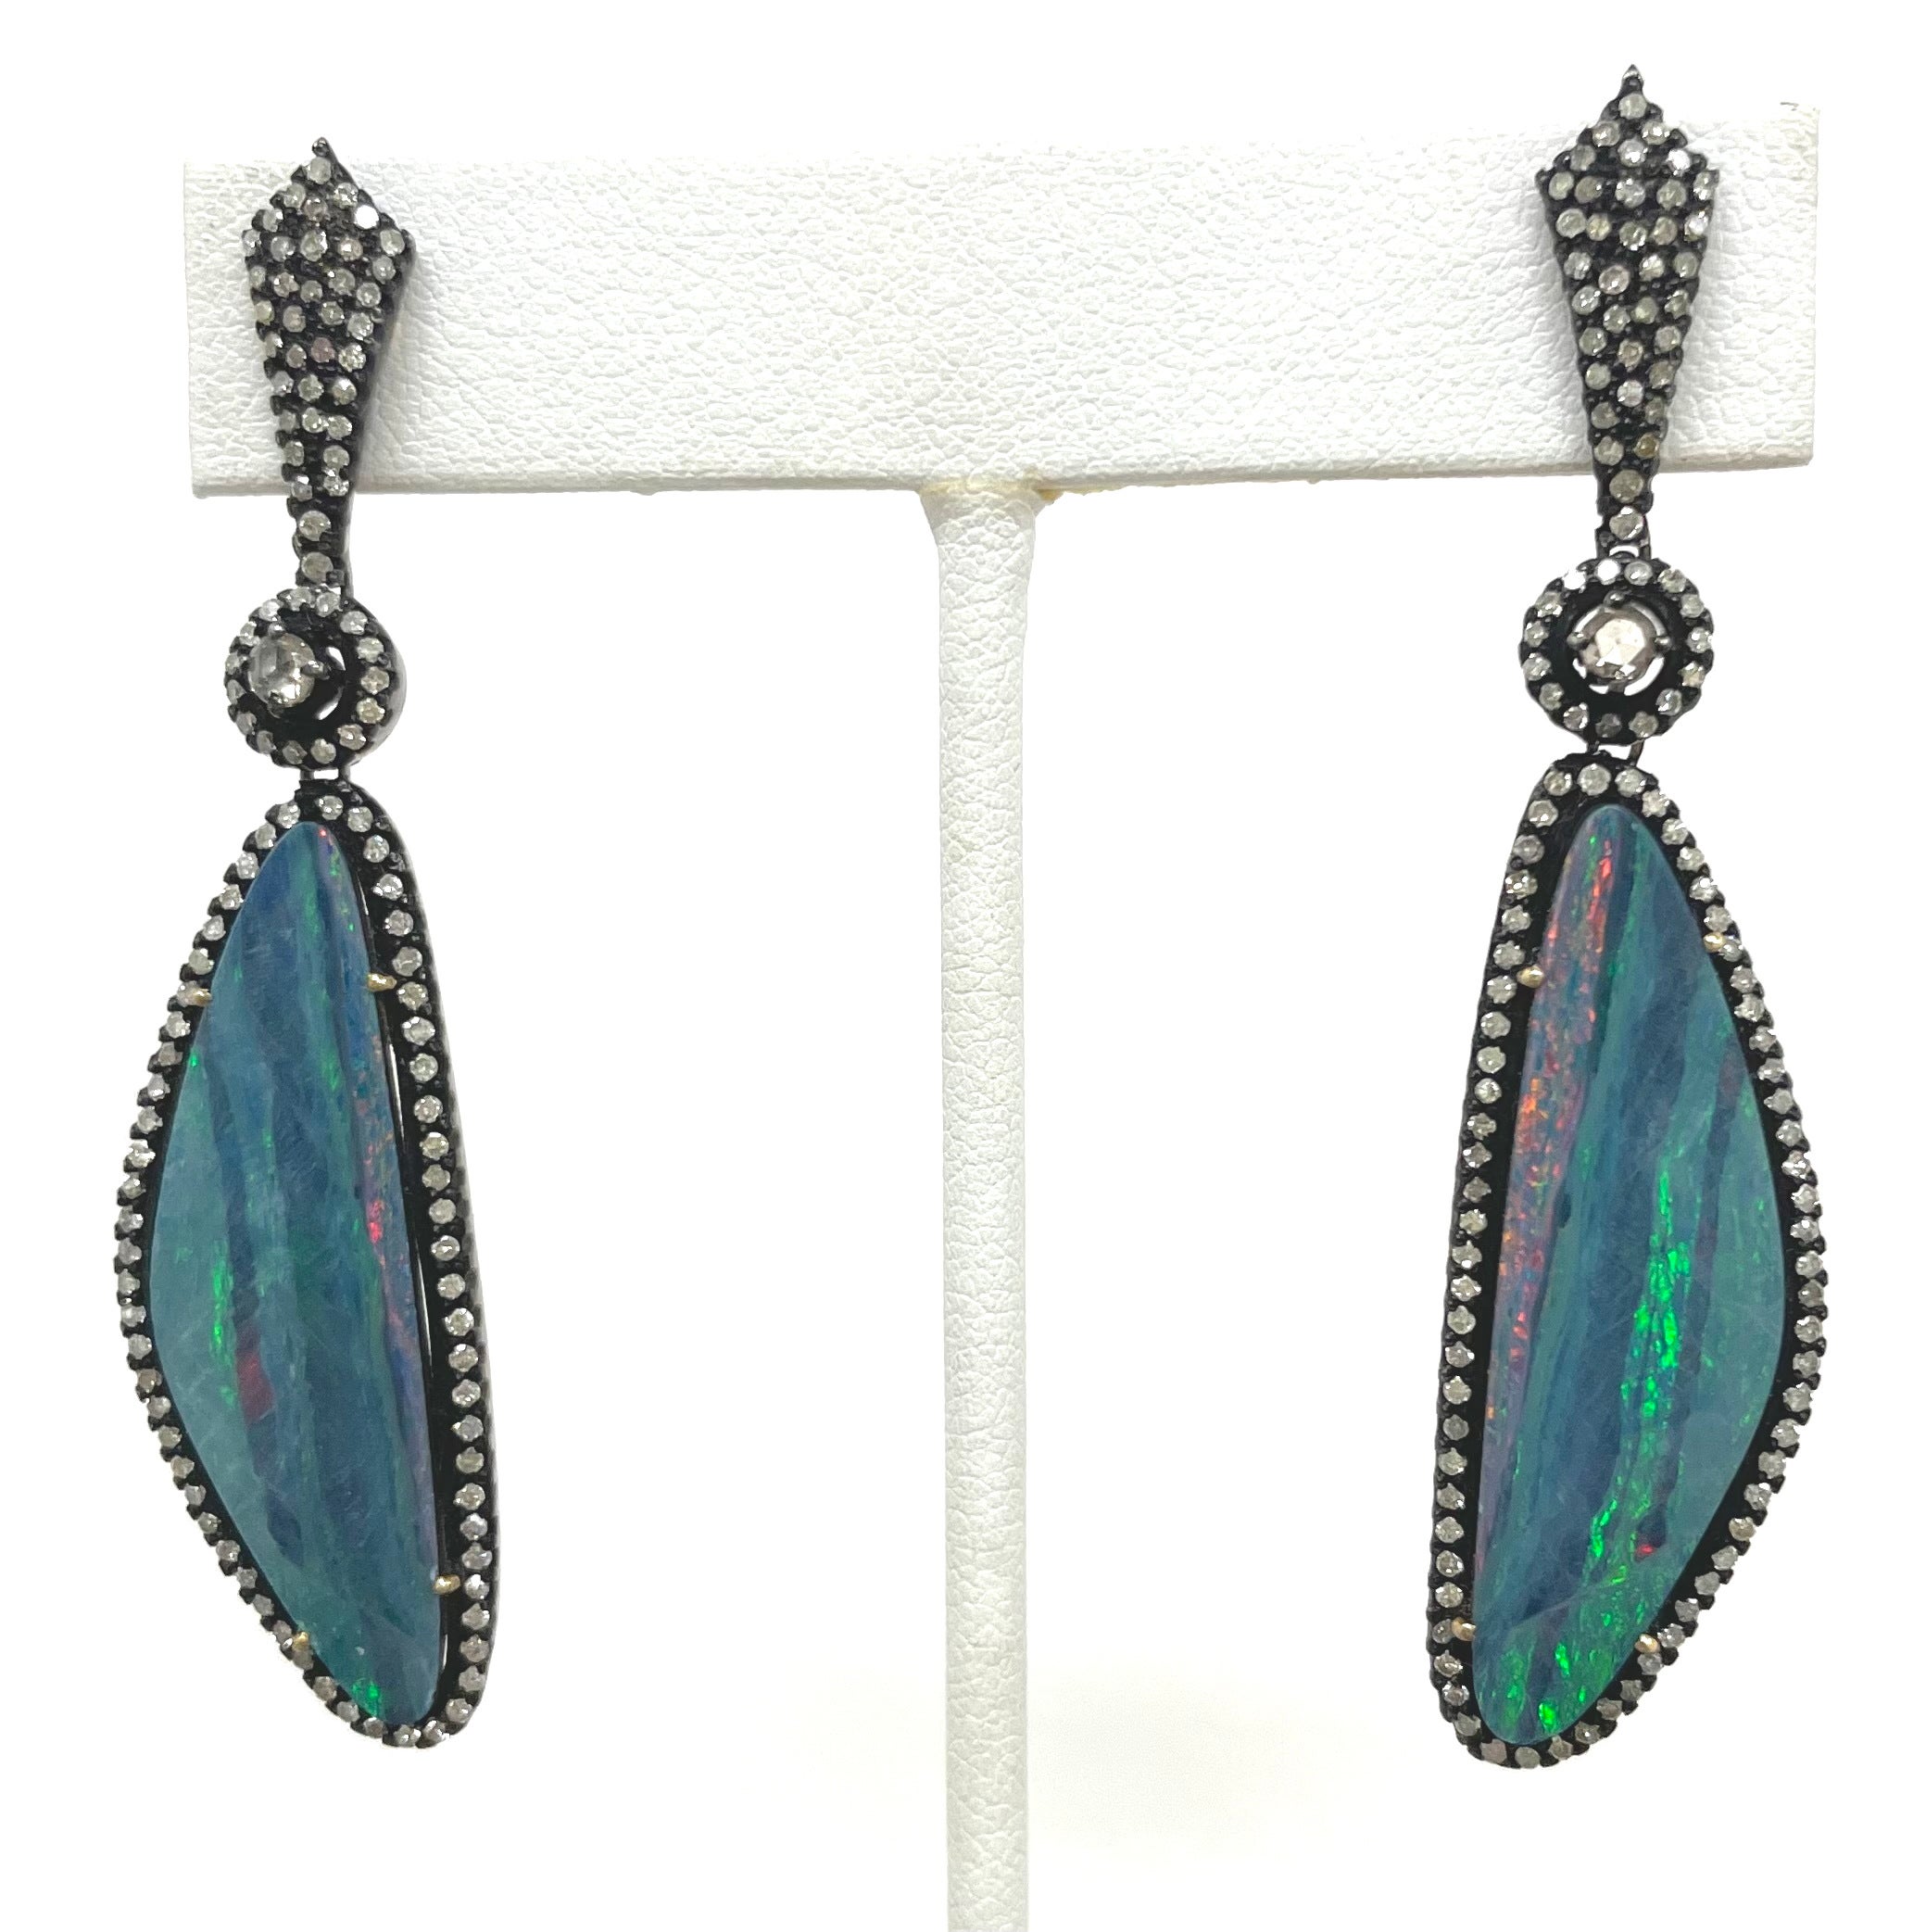 Description
Eye catching, exquisite, vivid blue color opal with a touch of fire. This pair was cut from one stone creating a mirror image of each other. The opals are embellished with white pave diamonds and a center champagne diamond, all of which